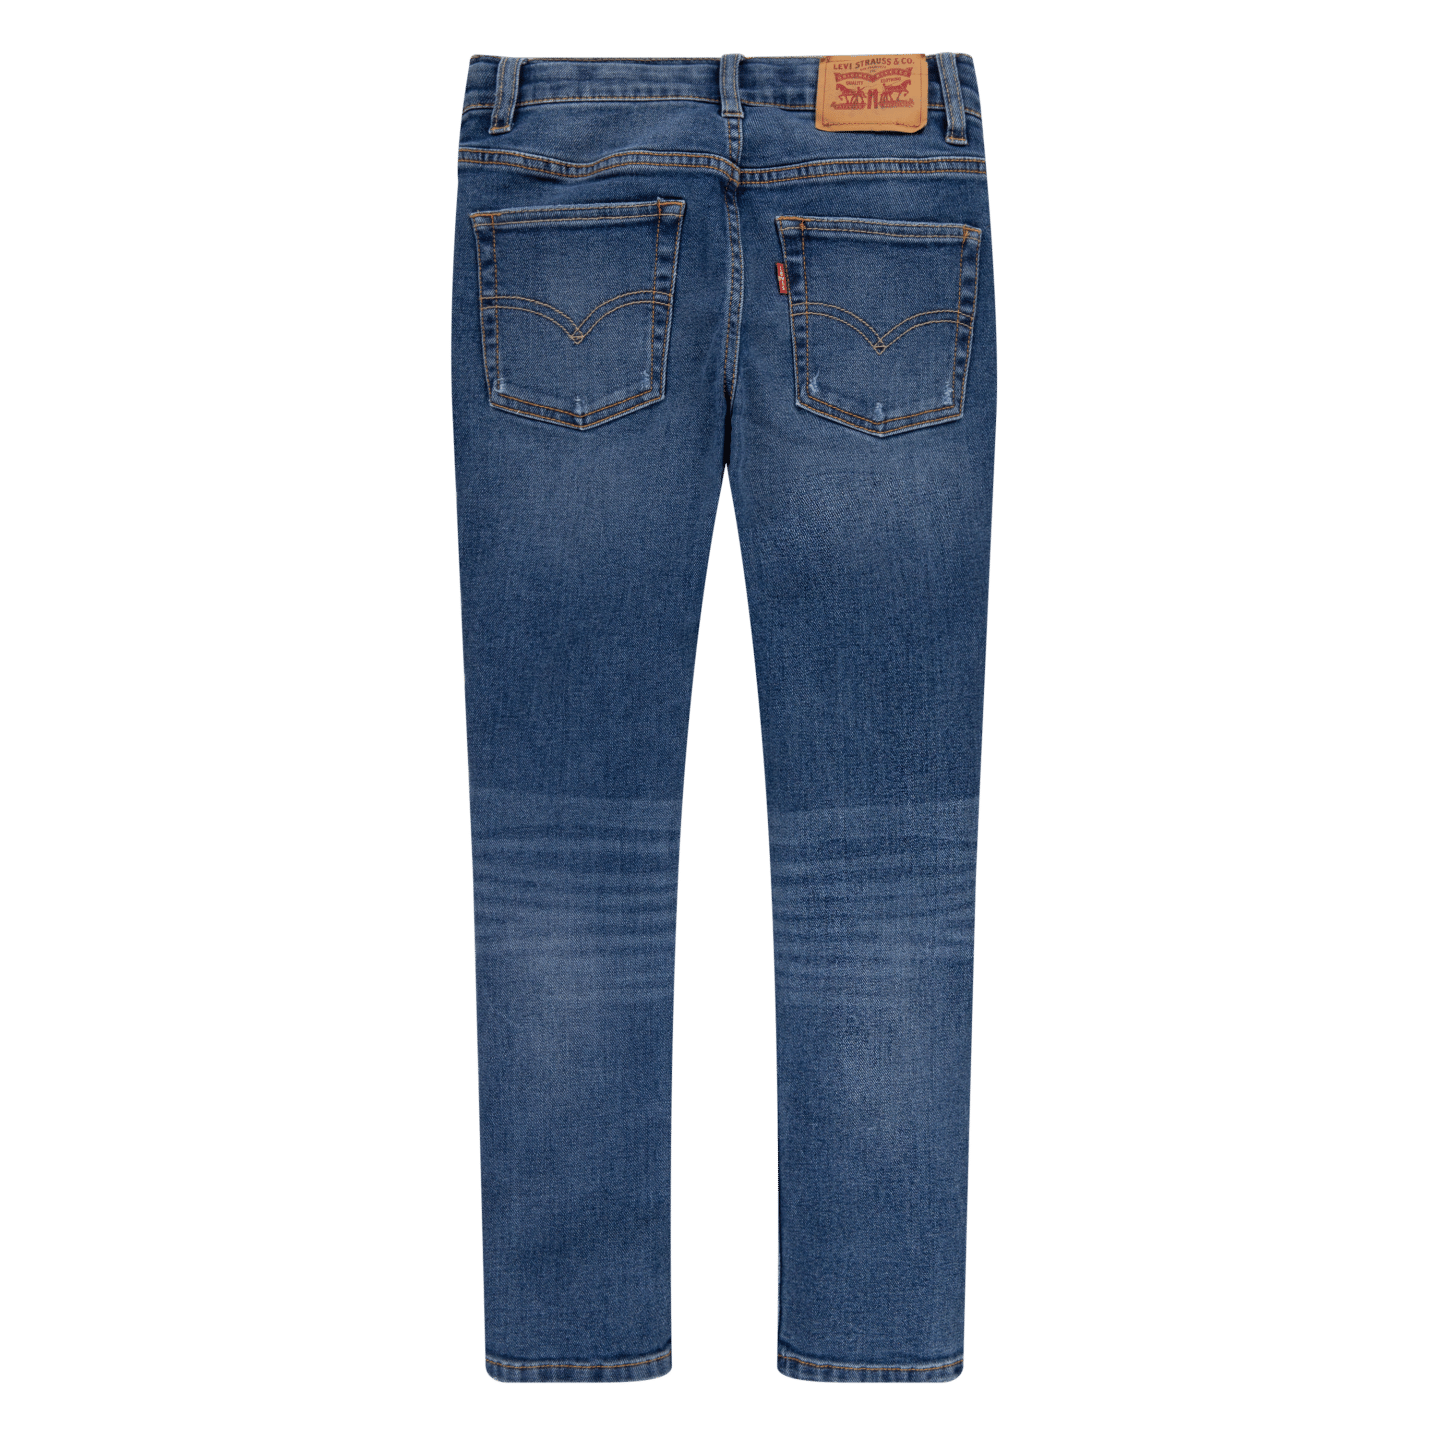 Levi's boys distressed jeans back view